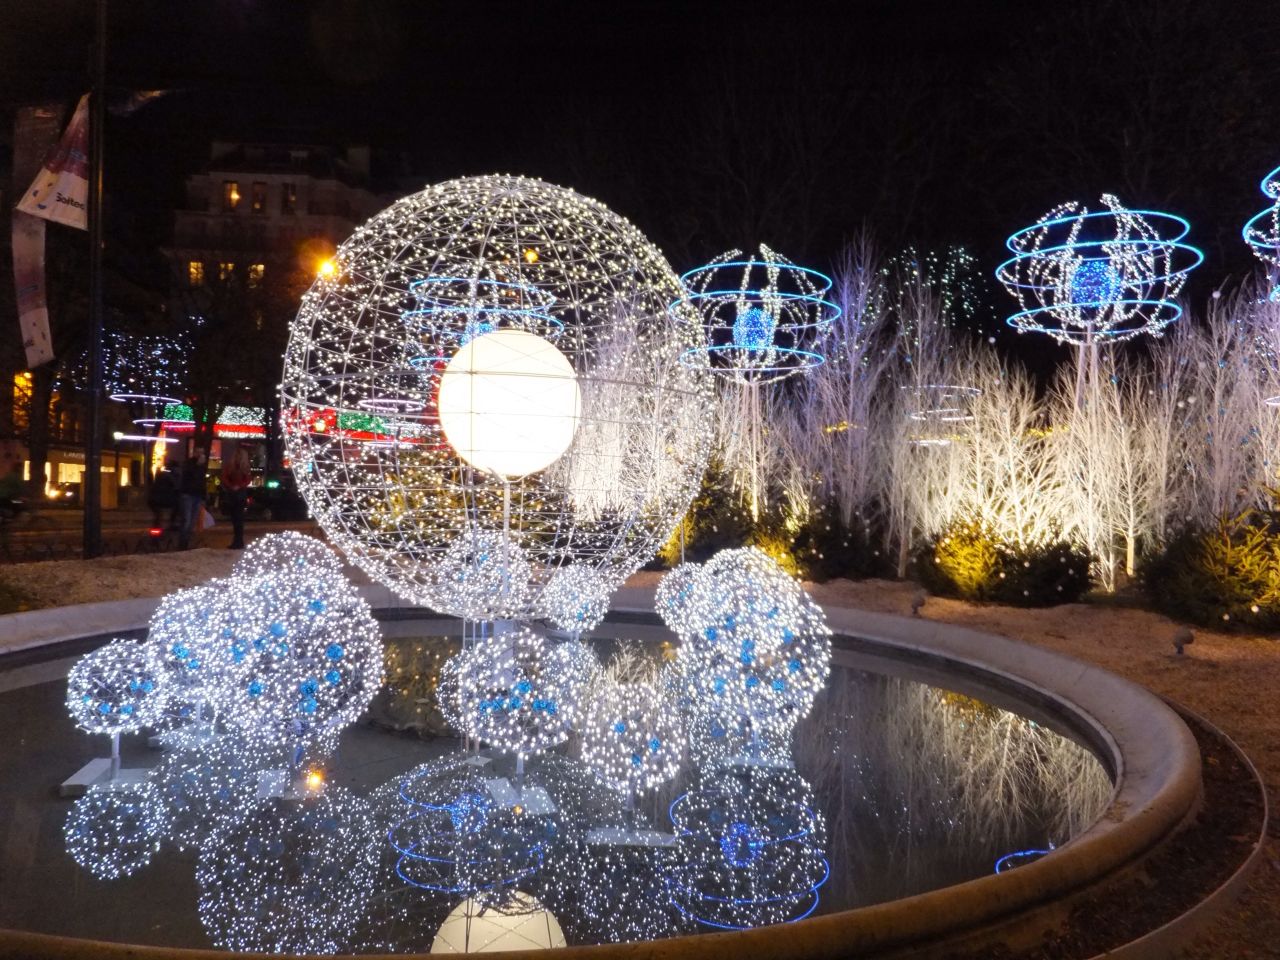 <a href="http://ireport.cnn.com/docs/DOC-1065830" target="_blank">Erin McCormack</a> was visiting Paris during a Thanksgiving vacation with her sister and a friend when she came across this light installation. "It definitely put me in more of a holiday spirit," she says.